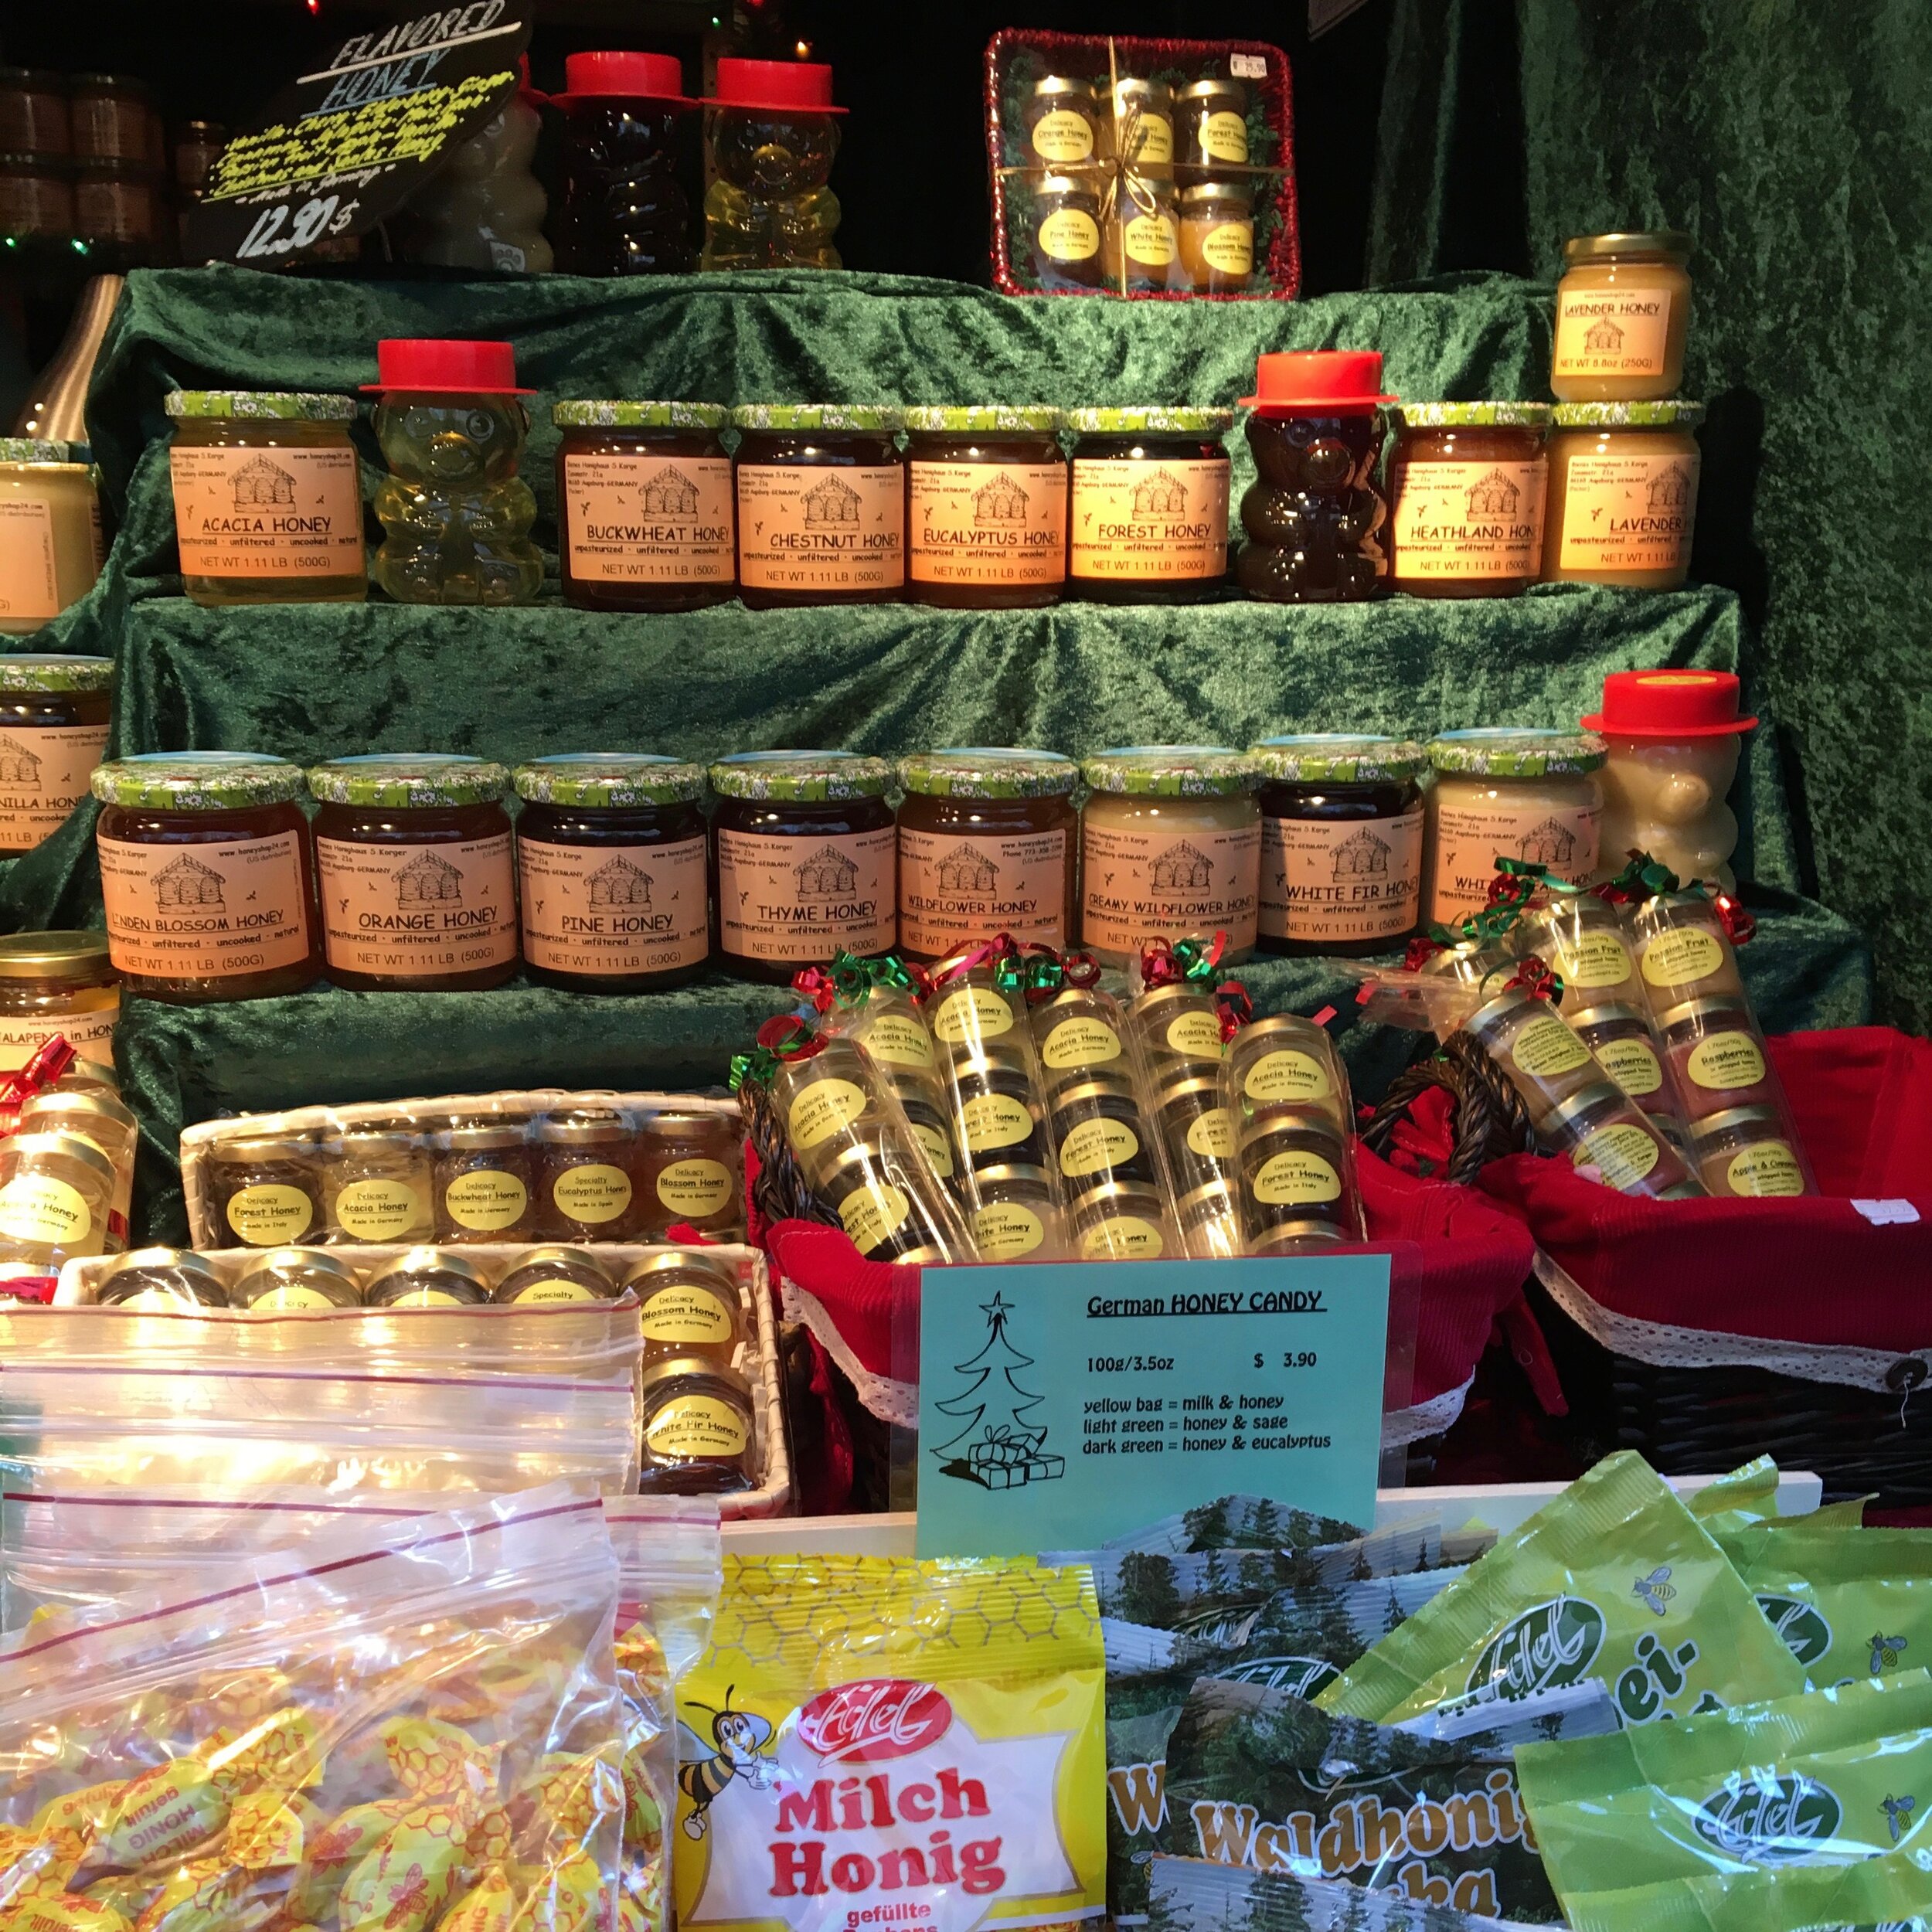  Bienes Honighaus: Gifts Made from Honey from Augsburg, Germany 